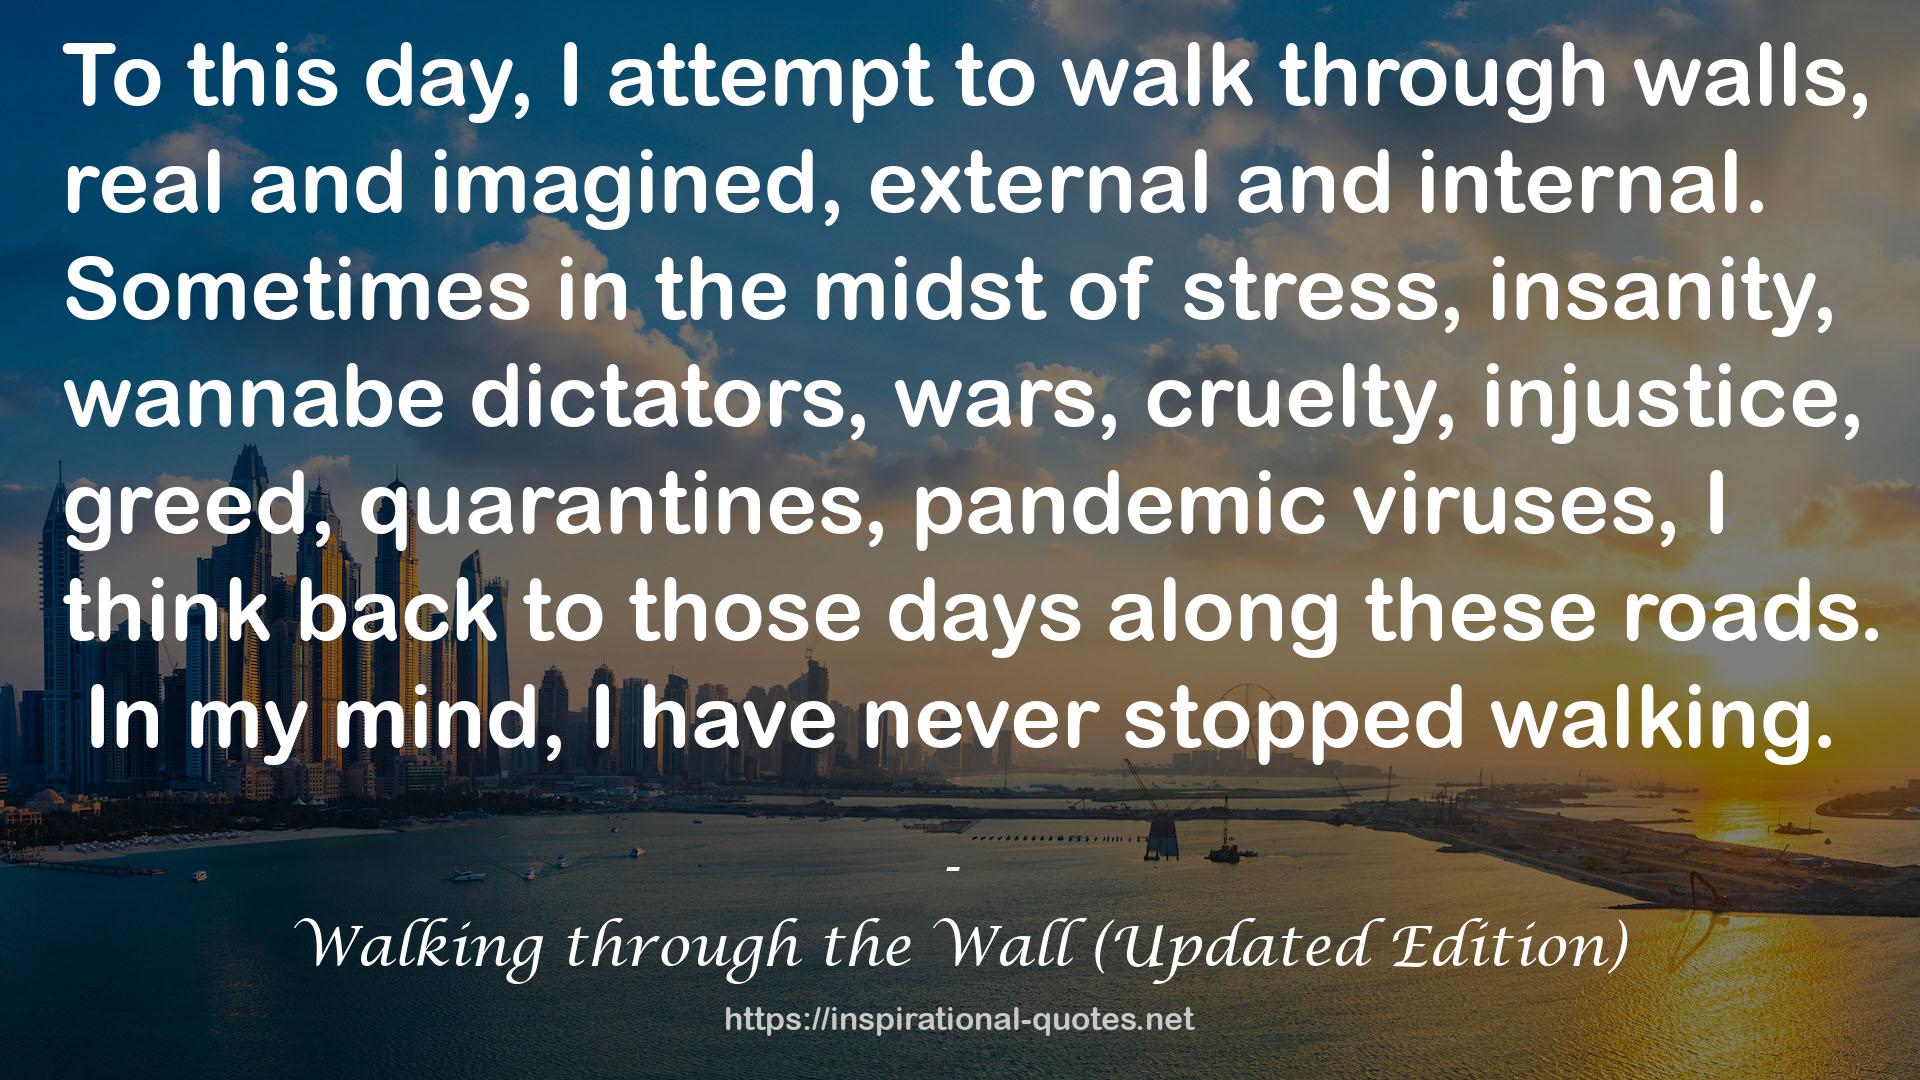 Walking through the Wall (Updated Edition) QUOTES